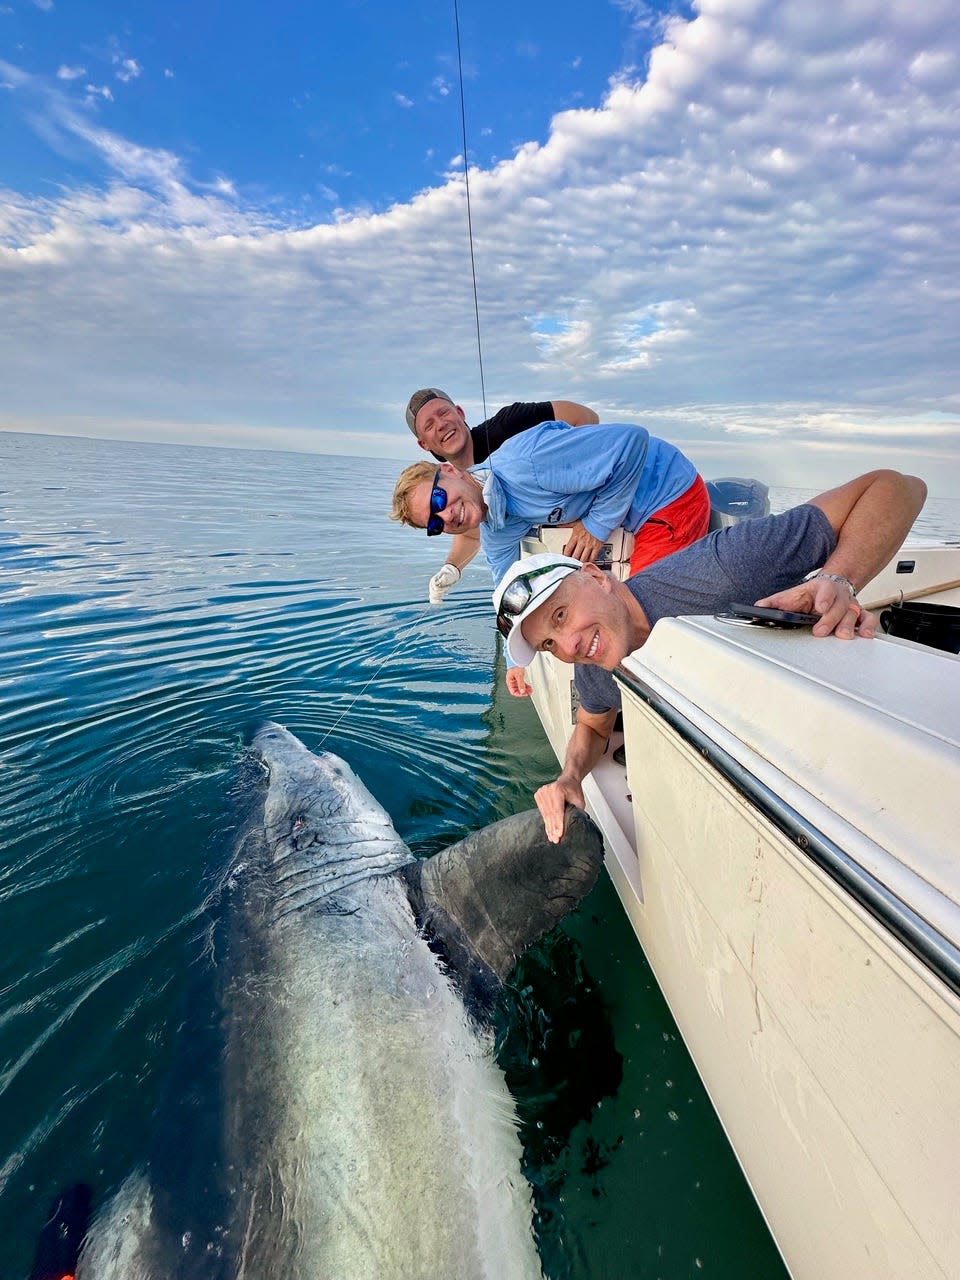 Posing with a 2,600-pound, 14-foot great white shark are (front to back) Ed Young, Chip Michalove and Dave Clark. The giant shark was caught in waters of South Carolina and named after Young's daughter who died after struggling with alcohol abuse.